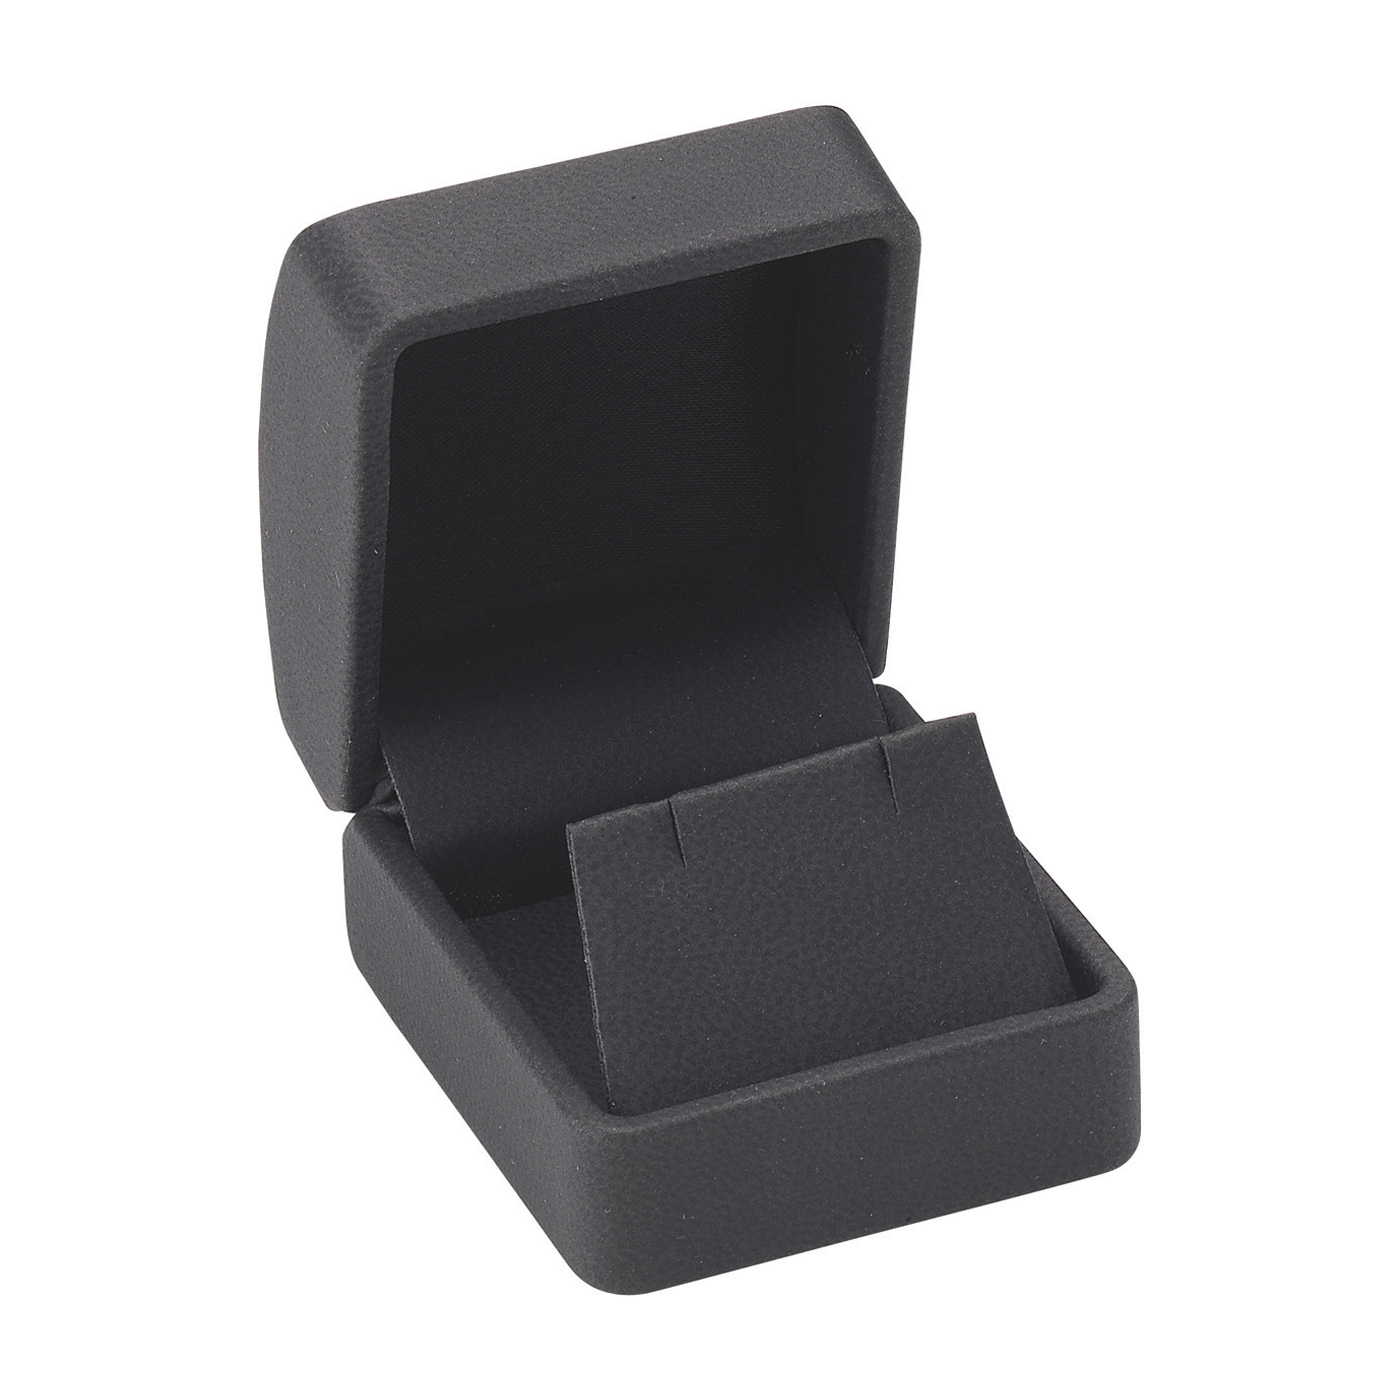 Jewellery Packaging "Soft Touch", Black, 45 x 45 x 26 mm - 1 piece